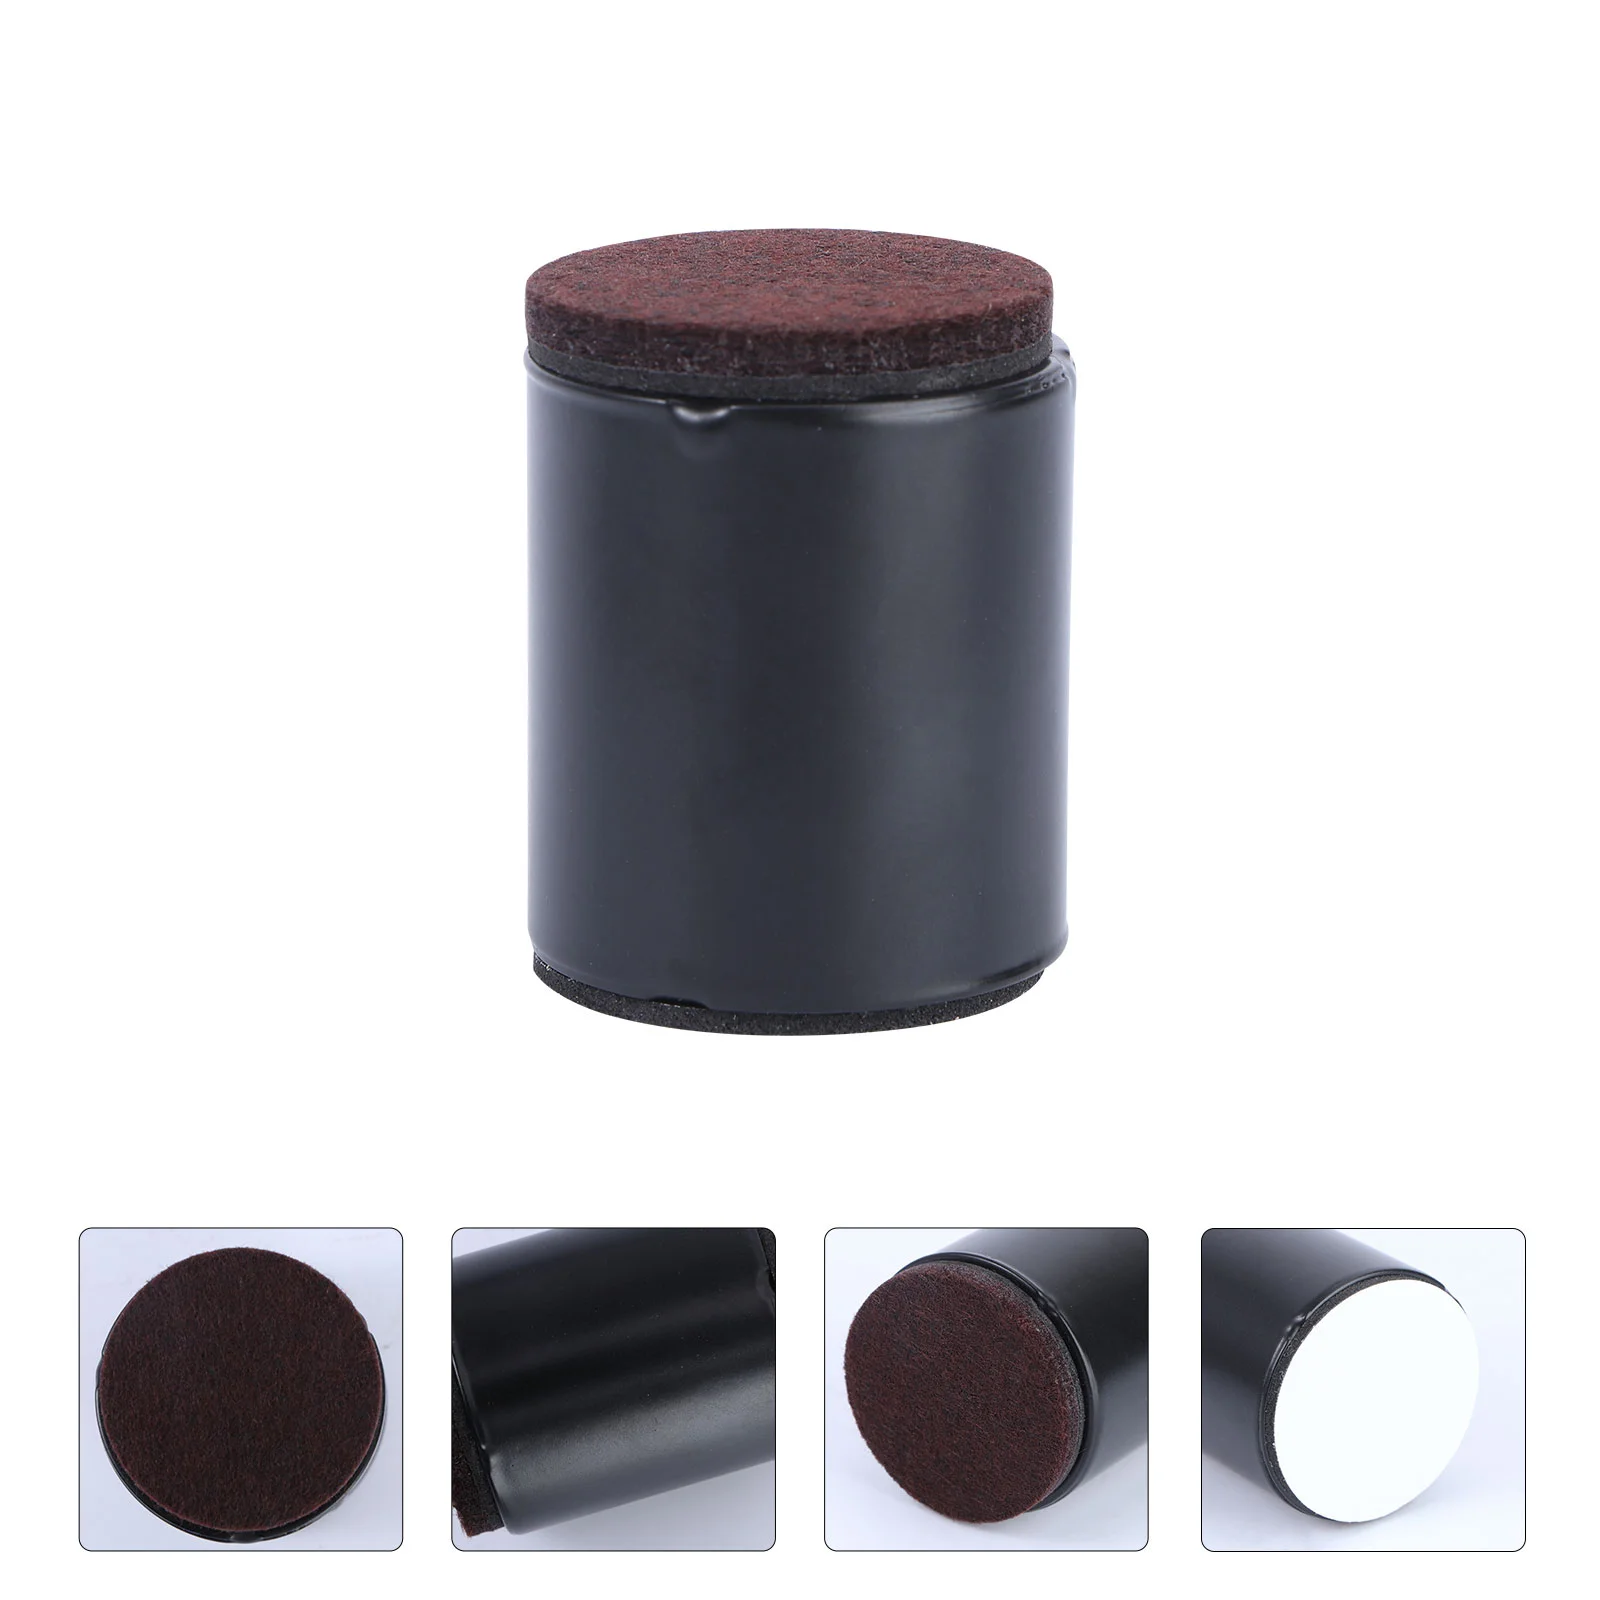 

4 Pcs Floor Couch Heightening Pads Lifting Table Mat Home Fridge Furniture Accessory Foot Cushion Carbon Steel Riser Sofa Mats